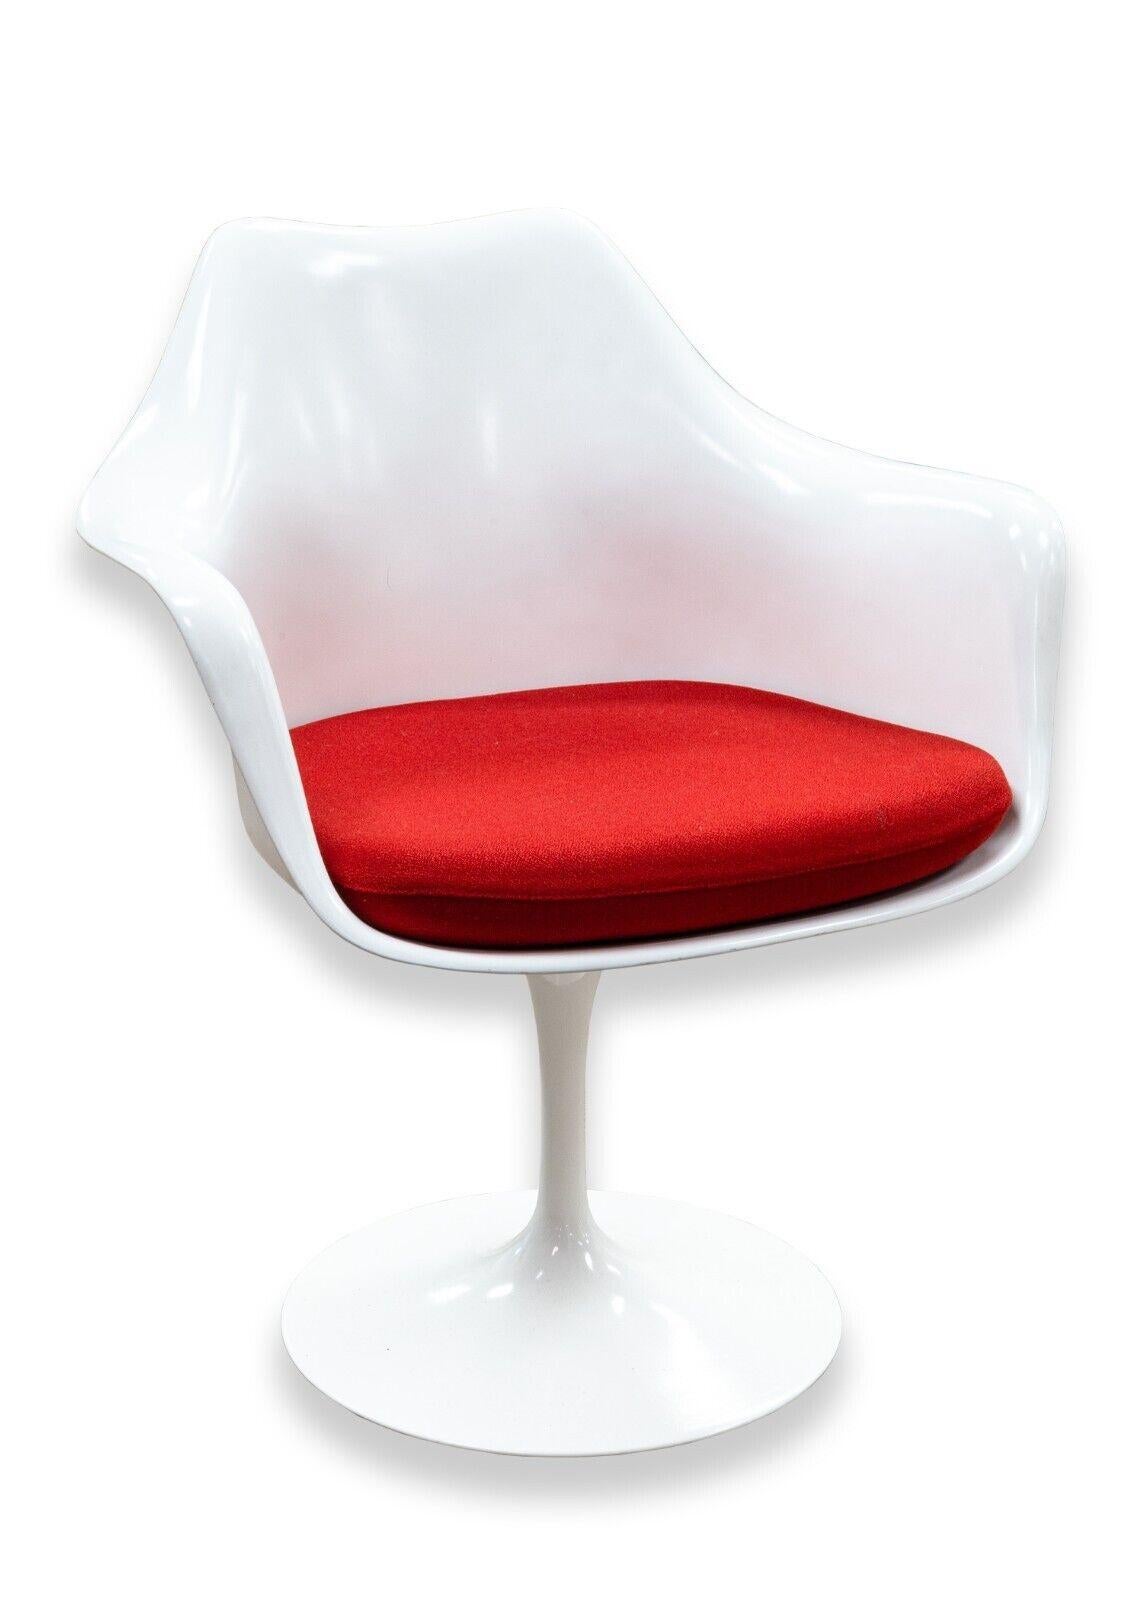 A set of 6 Knoll Saarinen tulip dining chairs. A fantastic set of classic Eero Saarinen designed tulip dining chairs for Knoll. This beautifully designed chairs feature the iconic tulip design with aluminum bases, acrylic seats, and a bright red